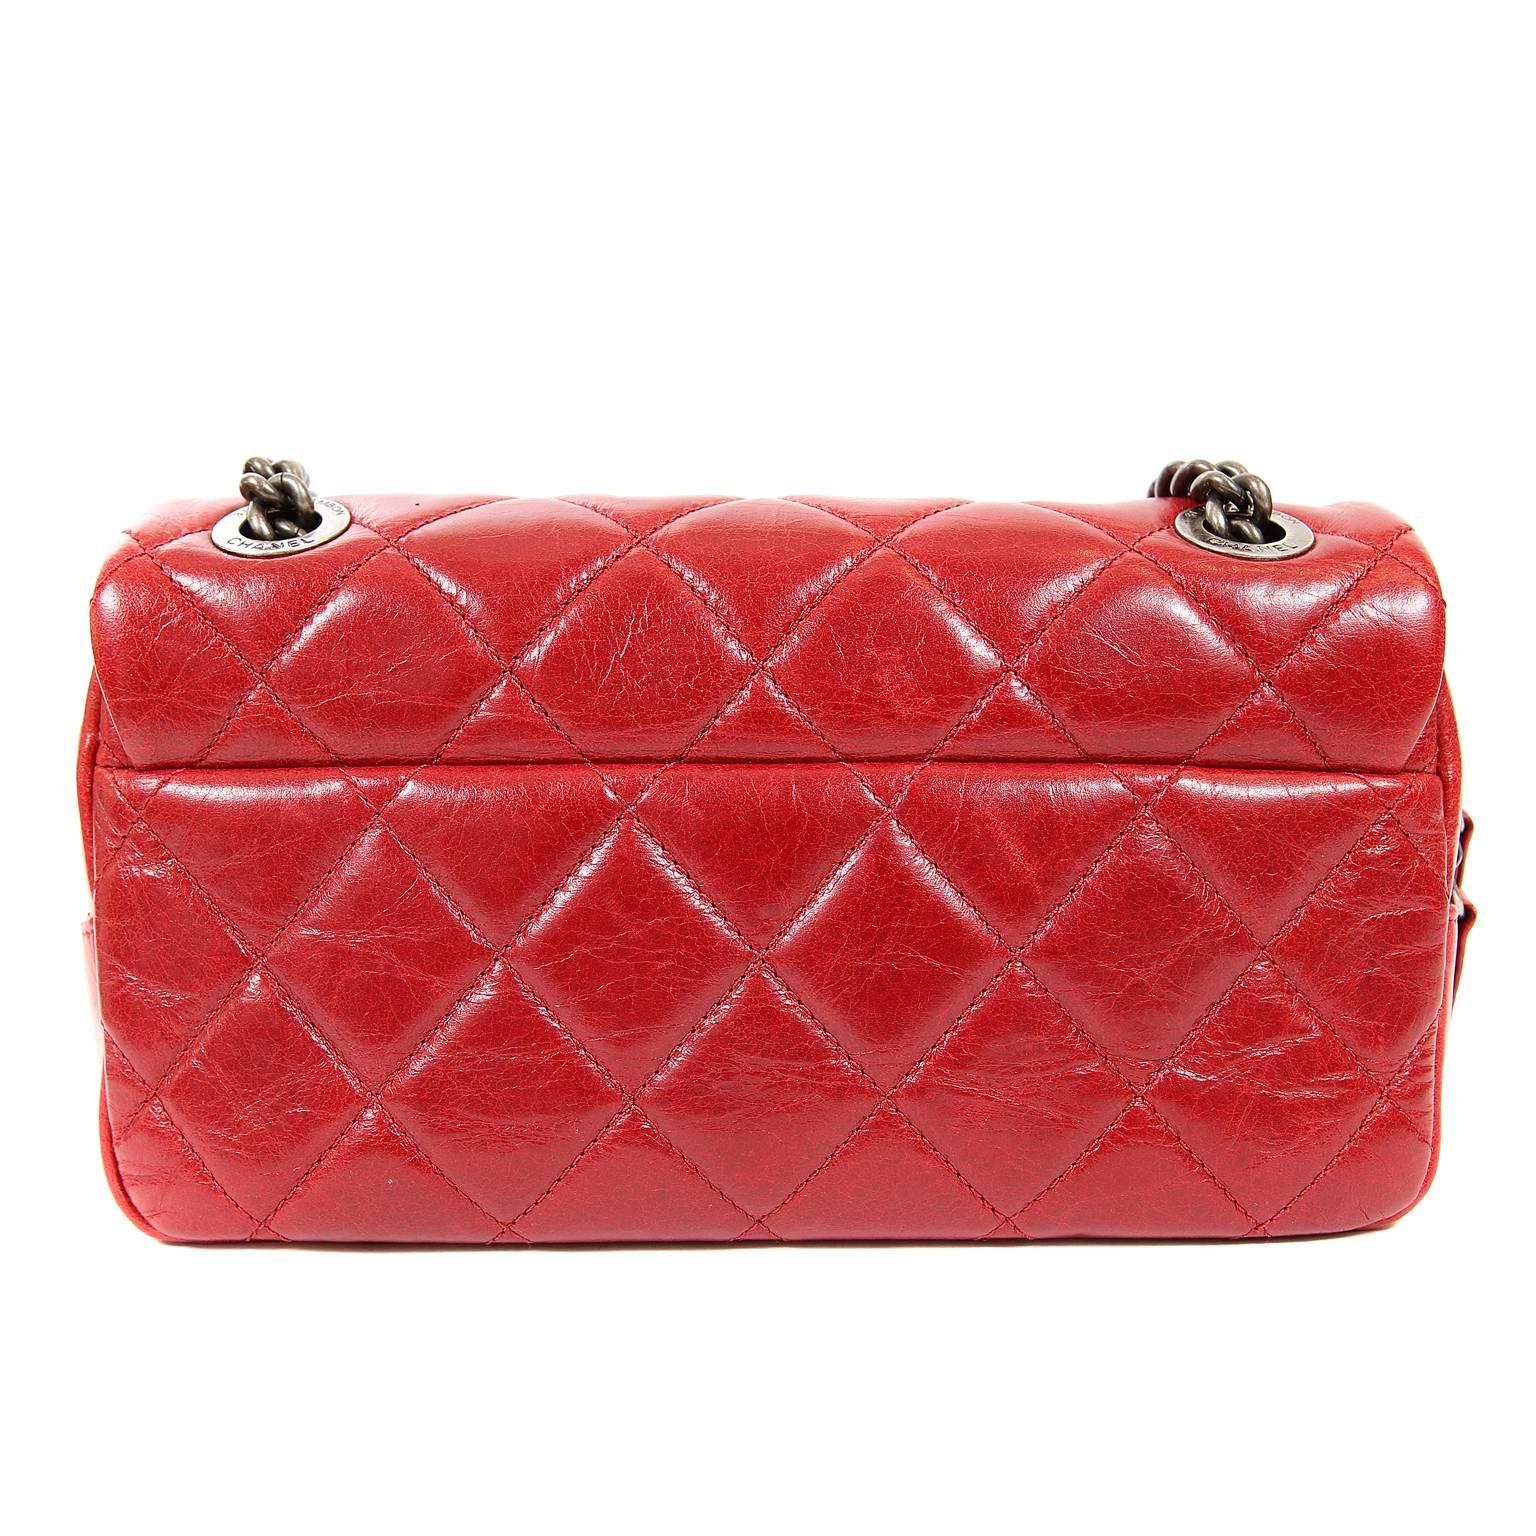 Chanel Red Distressed Leather Crossbody Bag- PRISTINE; appears never carried
  Uniquely designed with a strap that may be worn single or double, this small flap bag is extremely versatile.  
Lipstick red leather is intentionally distressed with a